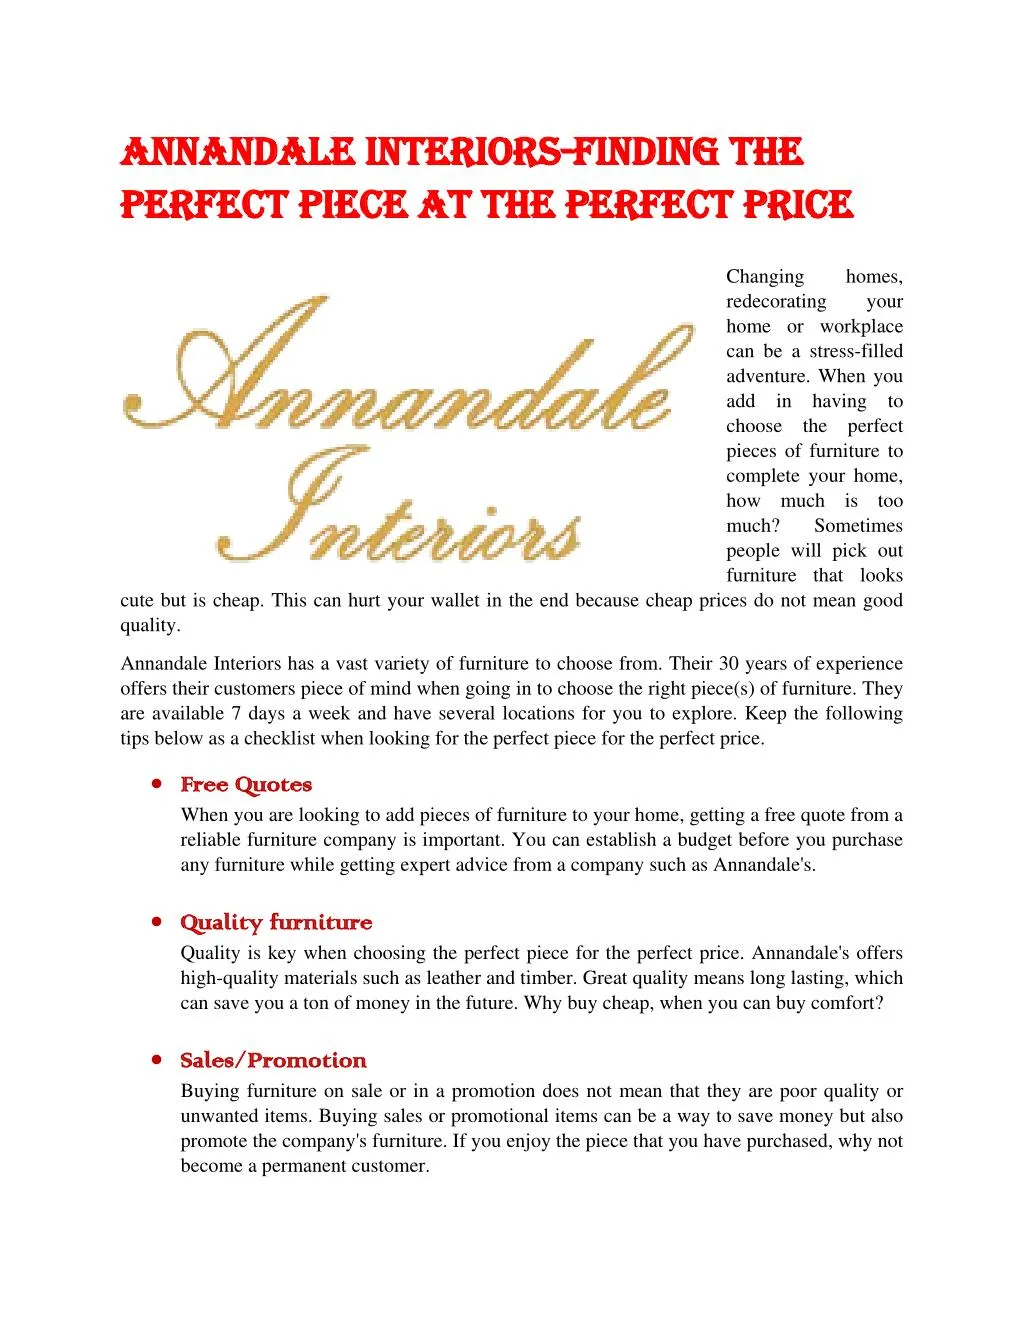 annandale interiors annandale interiors finding